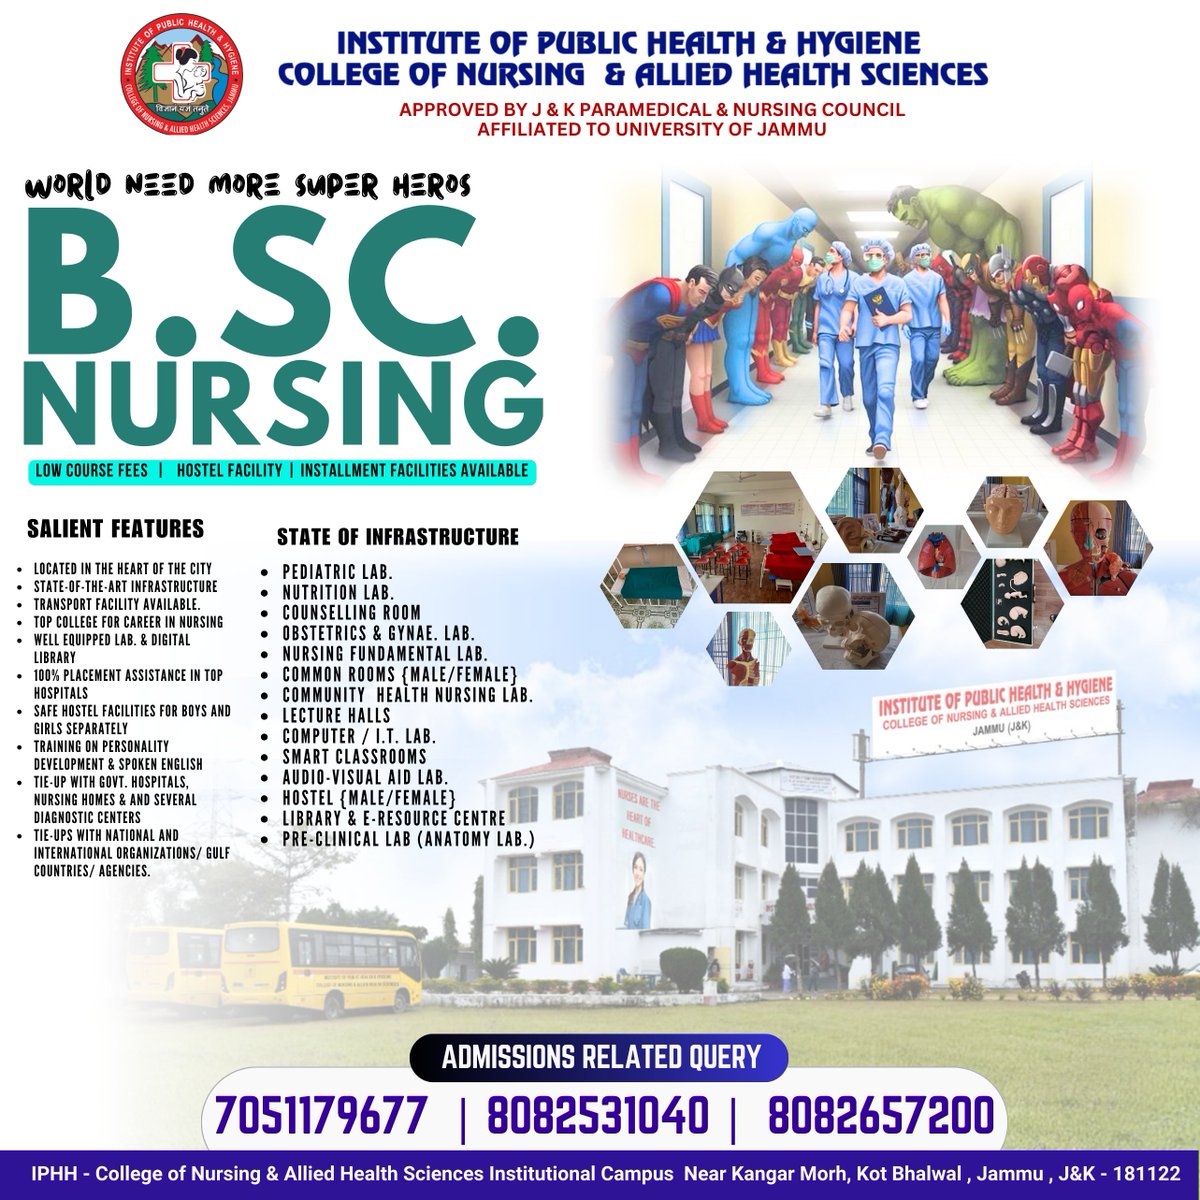 🌟  Unleash Your Inner Hero! 🦸‍♀️🦸‍♂️ Join the B. Sc. Nursing Program at  IPHH Jammu, your gateway to becoming a healthcare superhero! 💪
📲 7051179677
📲 8082531040
📲 8082657200

🩺 Be the hero the world needs!
#NursingProgram #SuperheroInTraining #IPHHJammu #AdmissionsOpen 🦹‍♀️